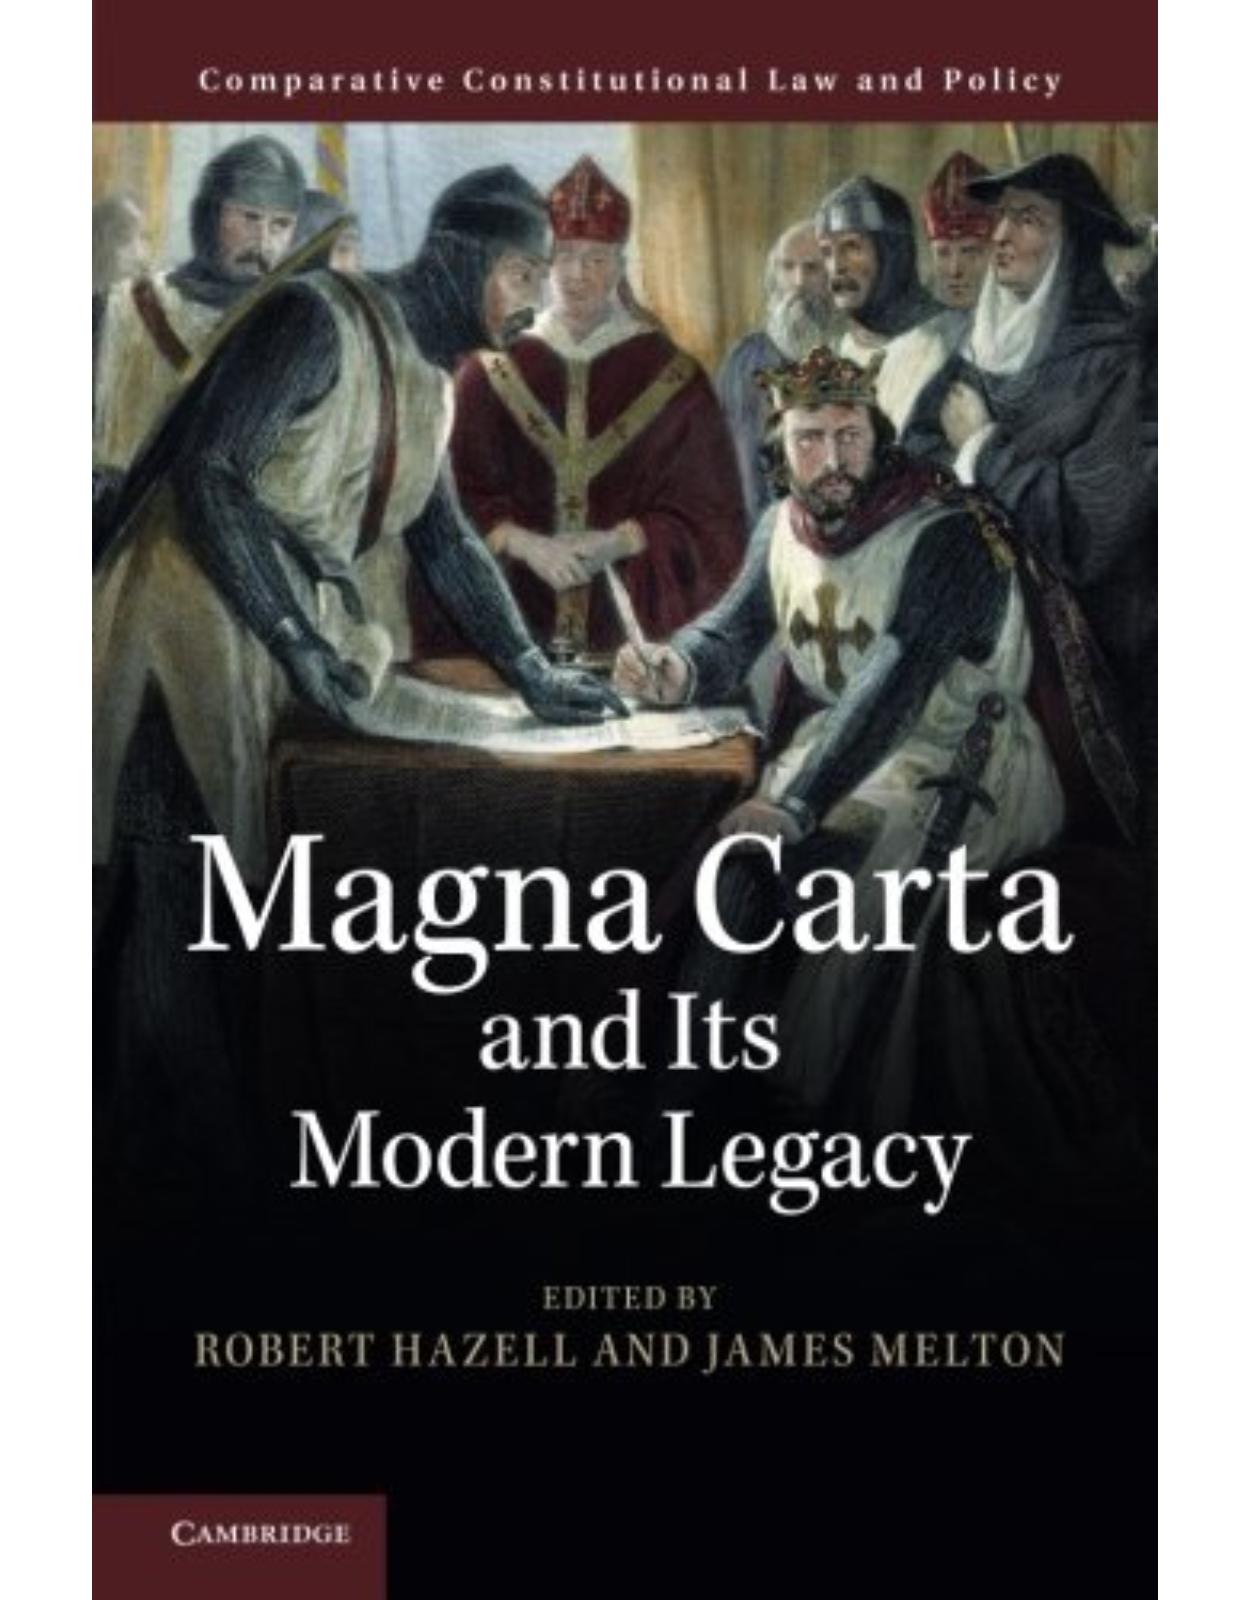 Magna Carta and its Modern Legacy (Comparative Constitutional Law and Policy)